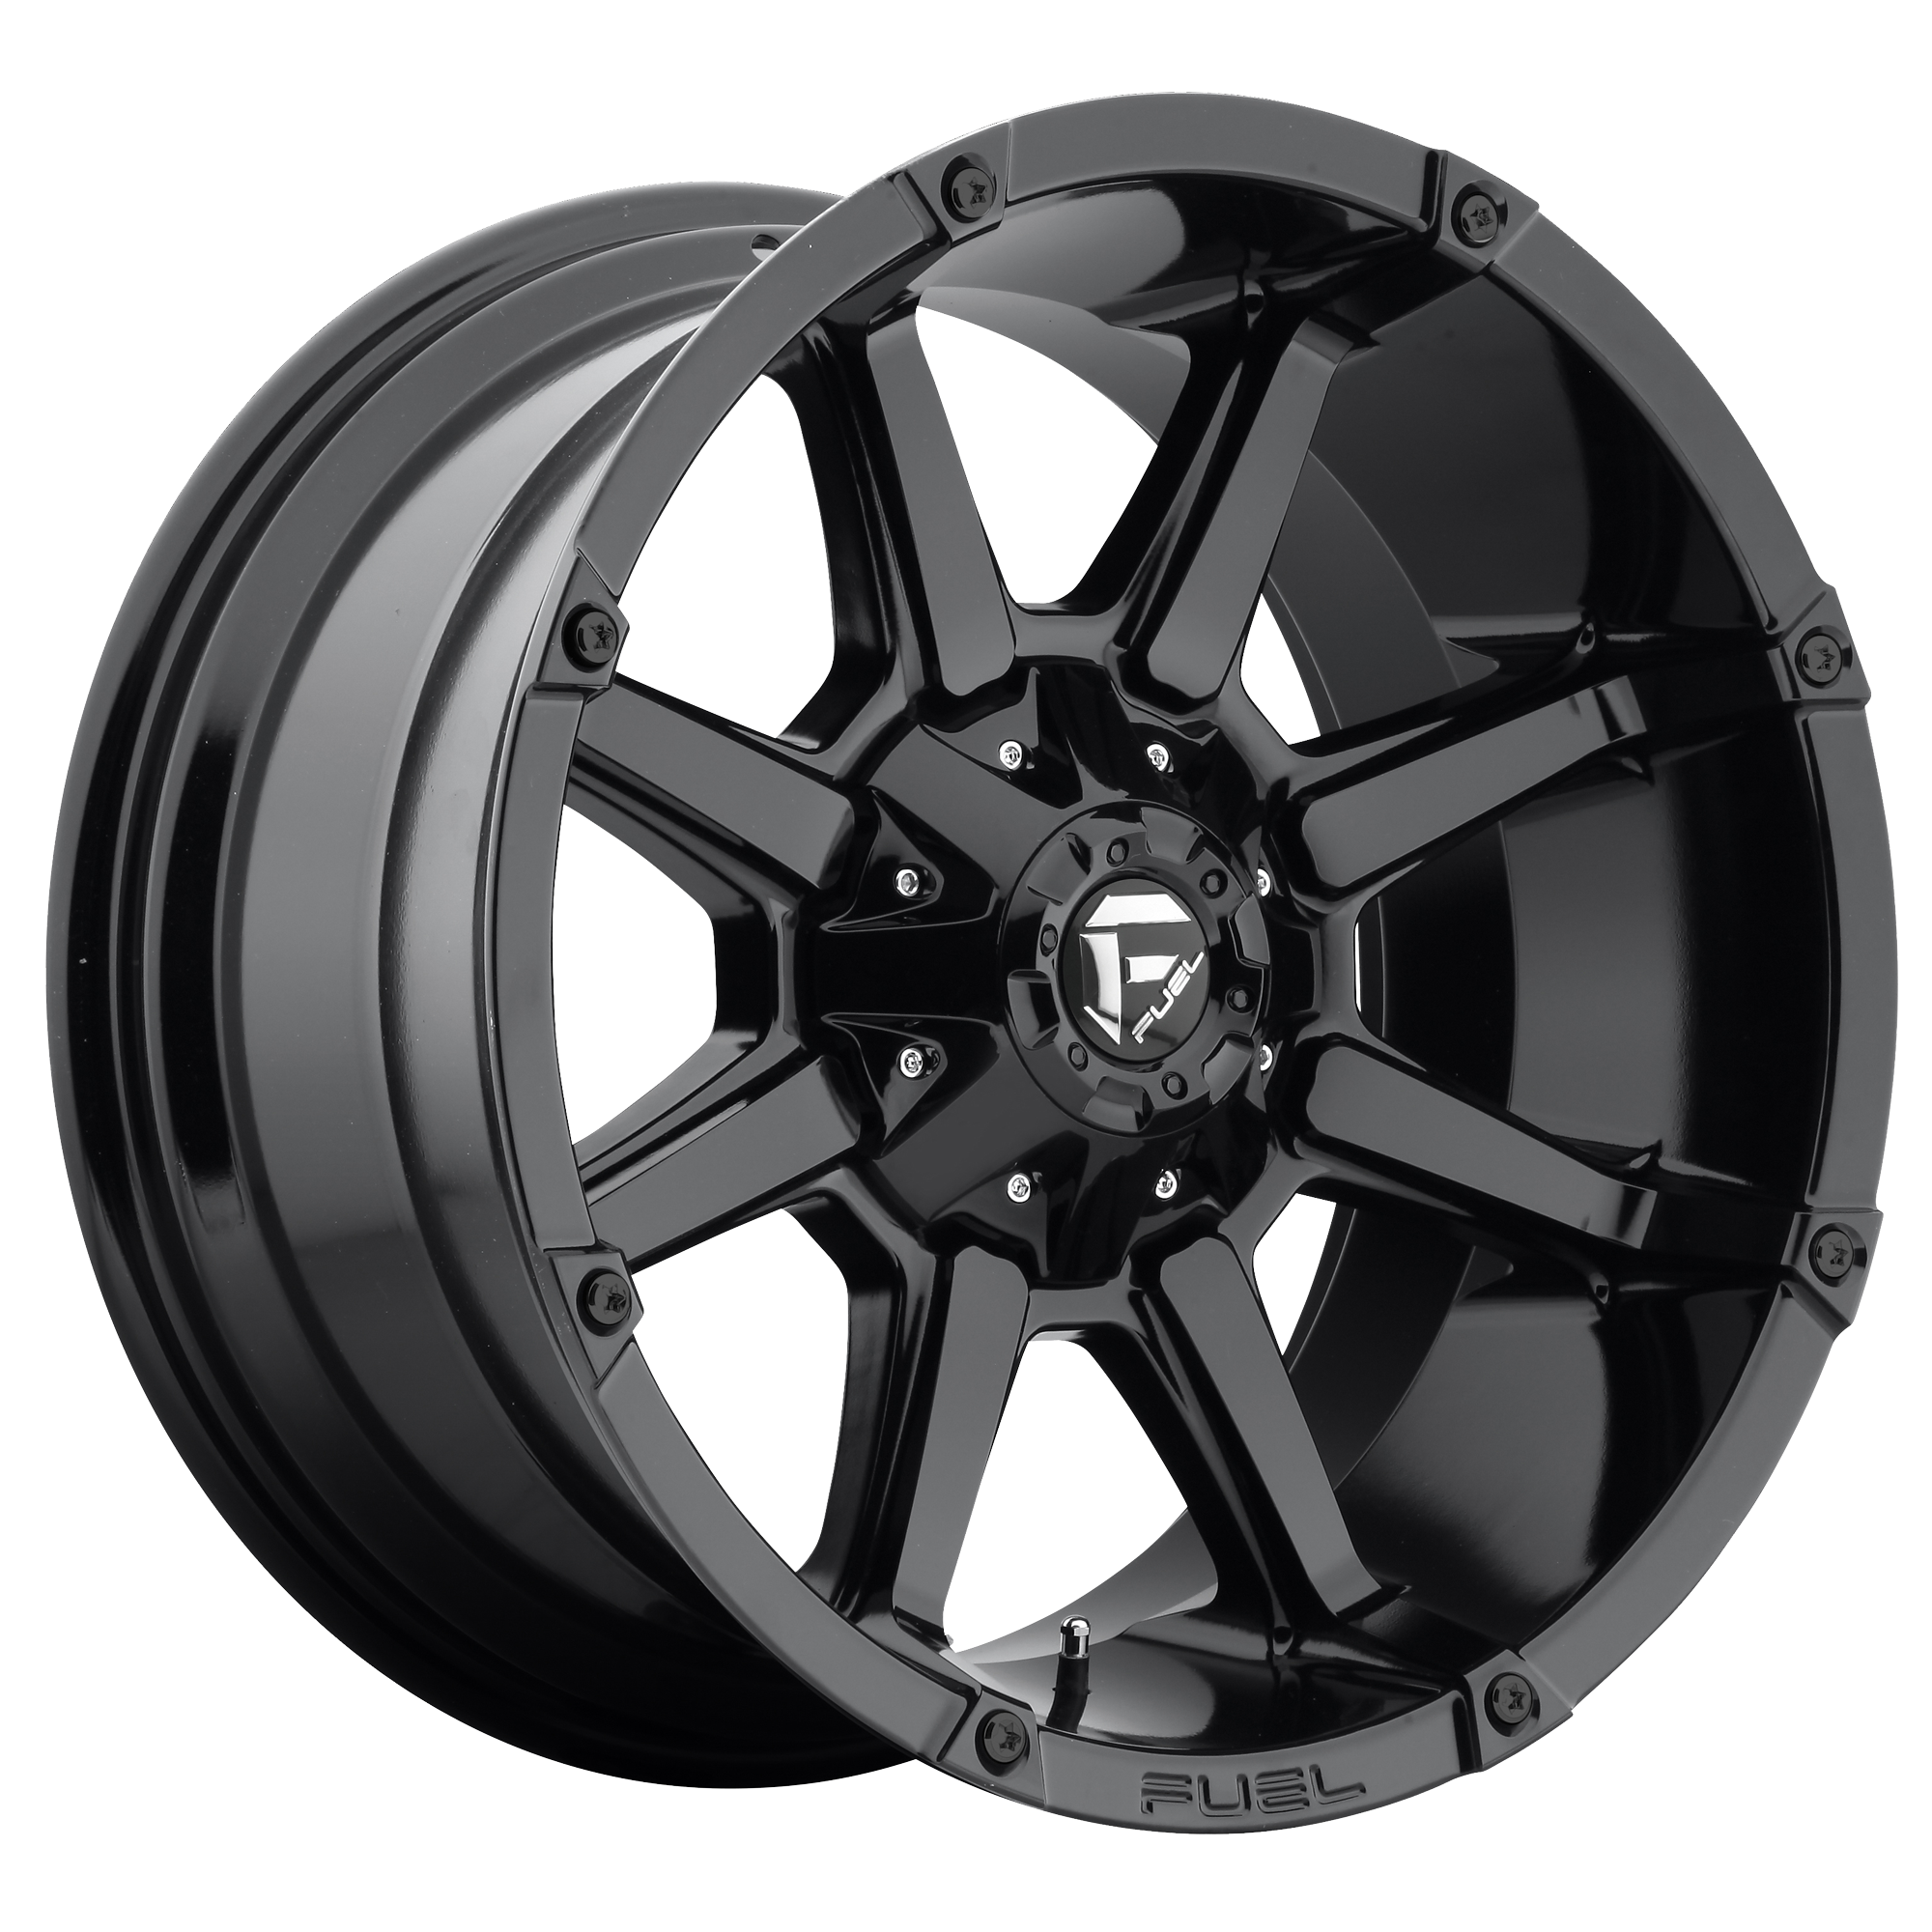 COUPLER 18x9 5x114.30/5x127.00 GLOSS BLACK (-12 mm) - Tires and Engine Performance